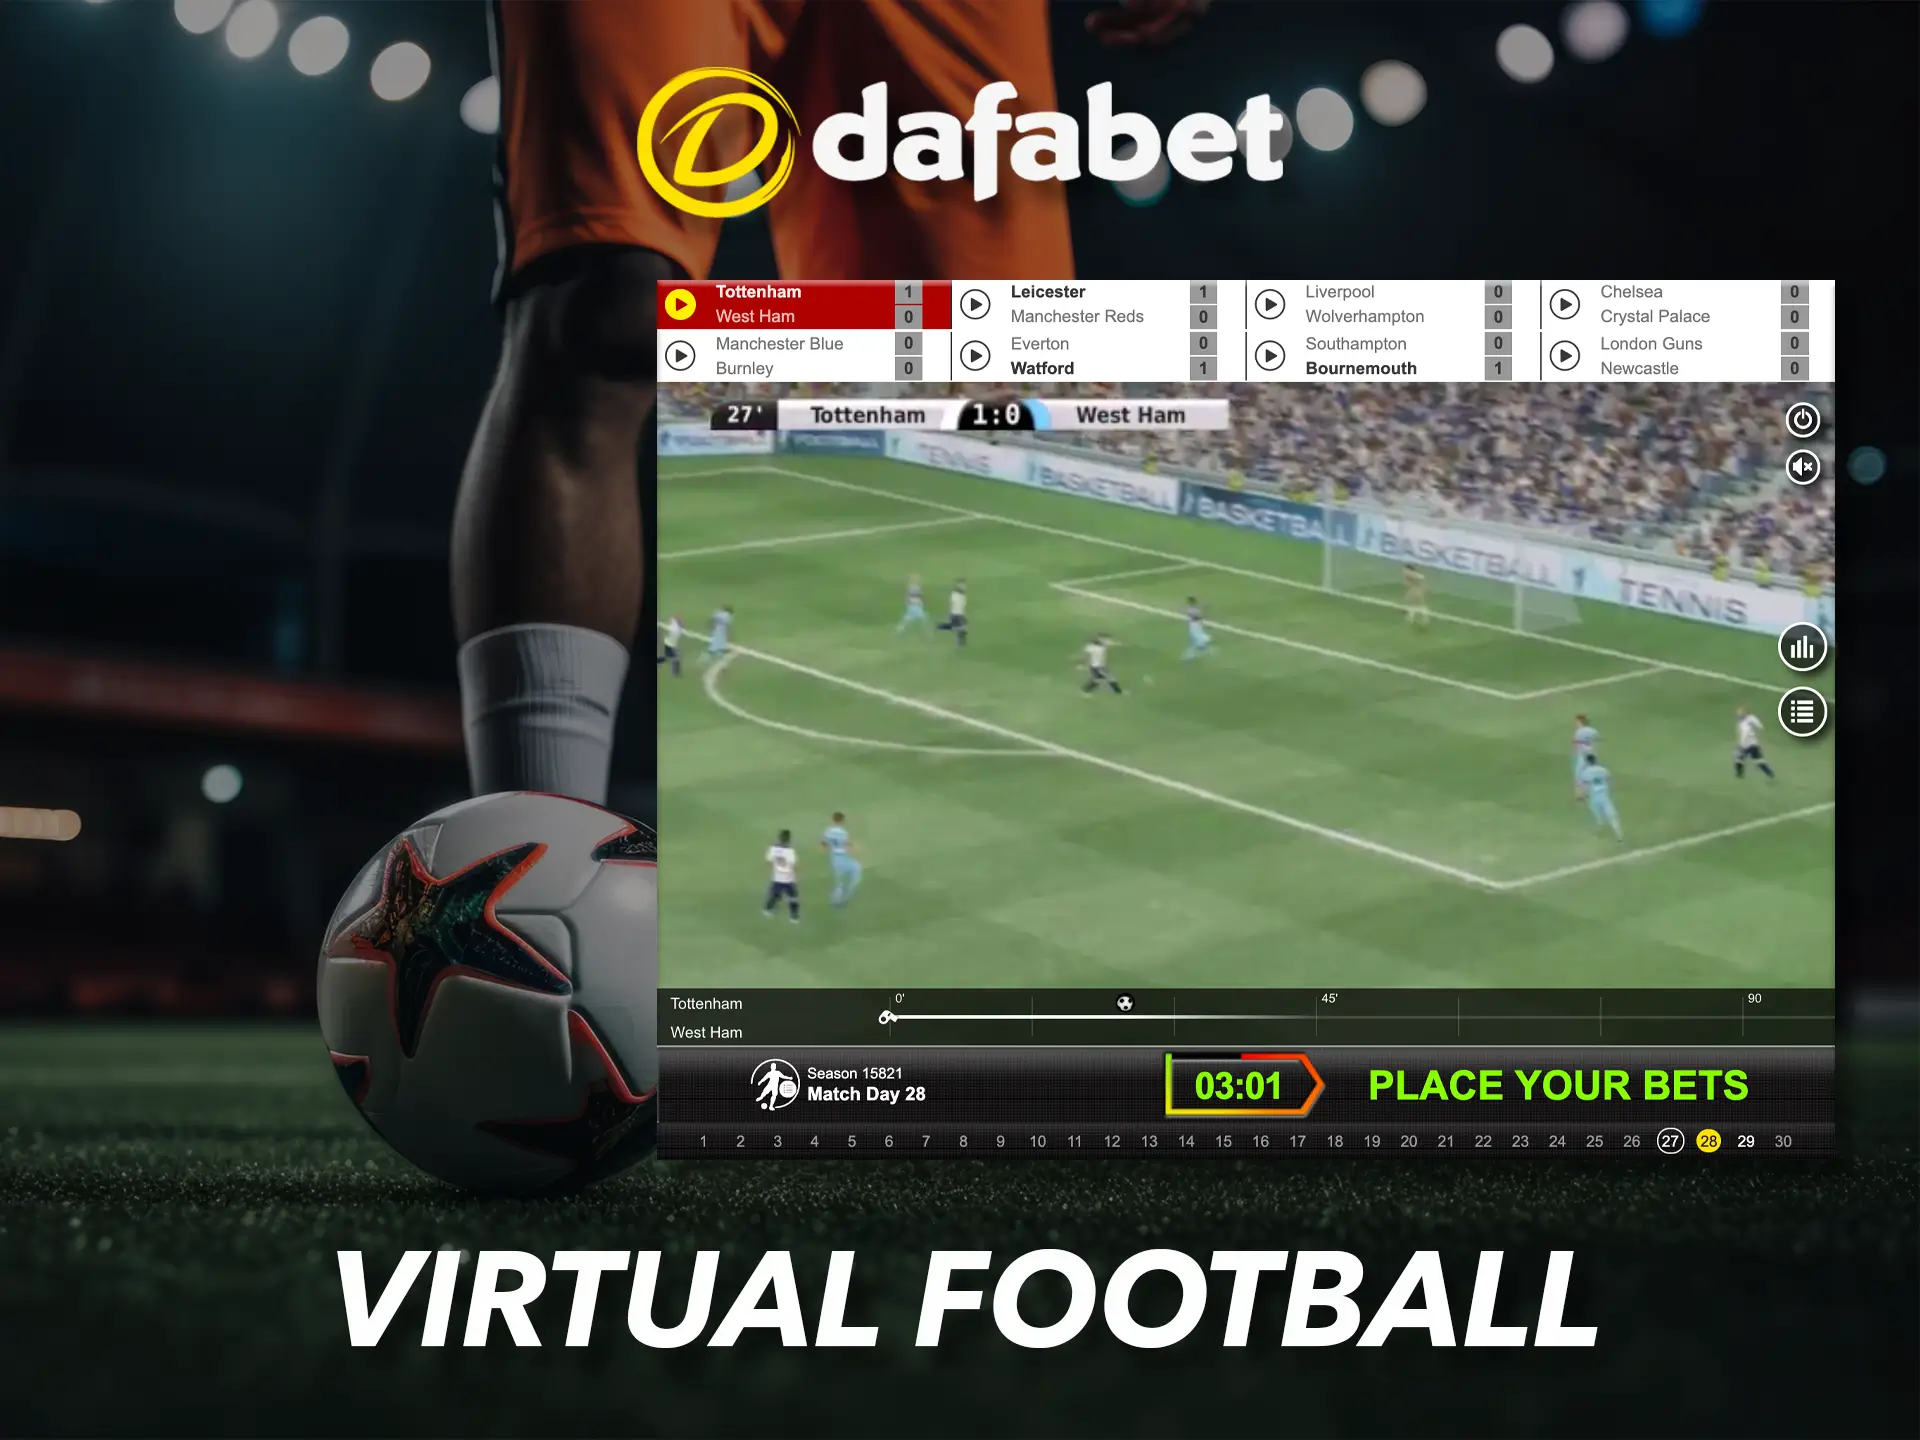 Enjoy the beautiful graphics of virtual football from Dafabet.